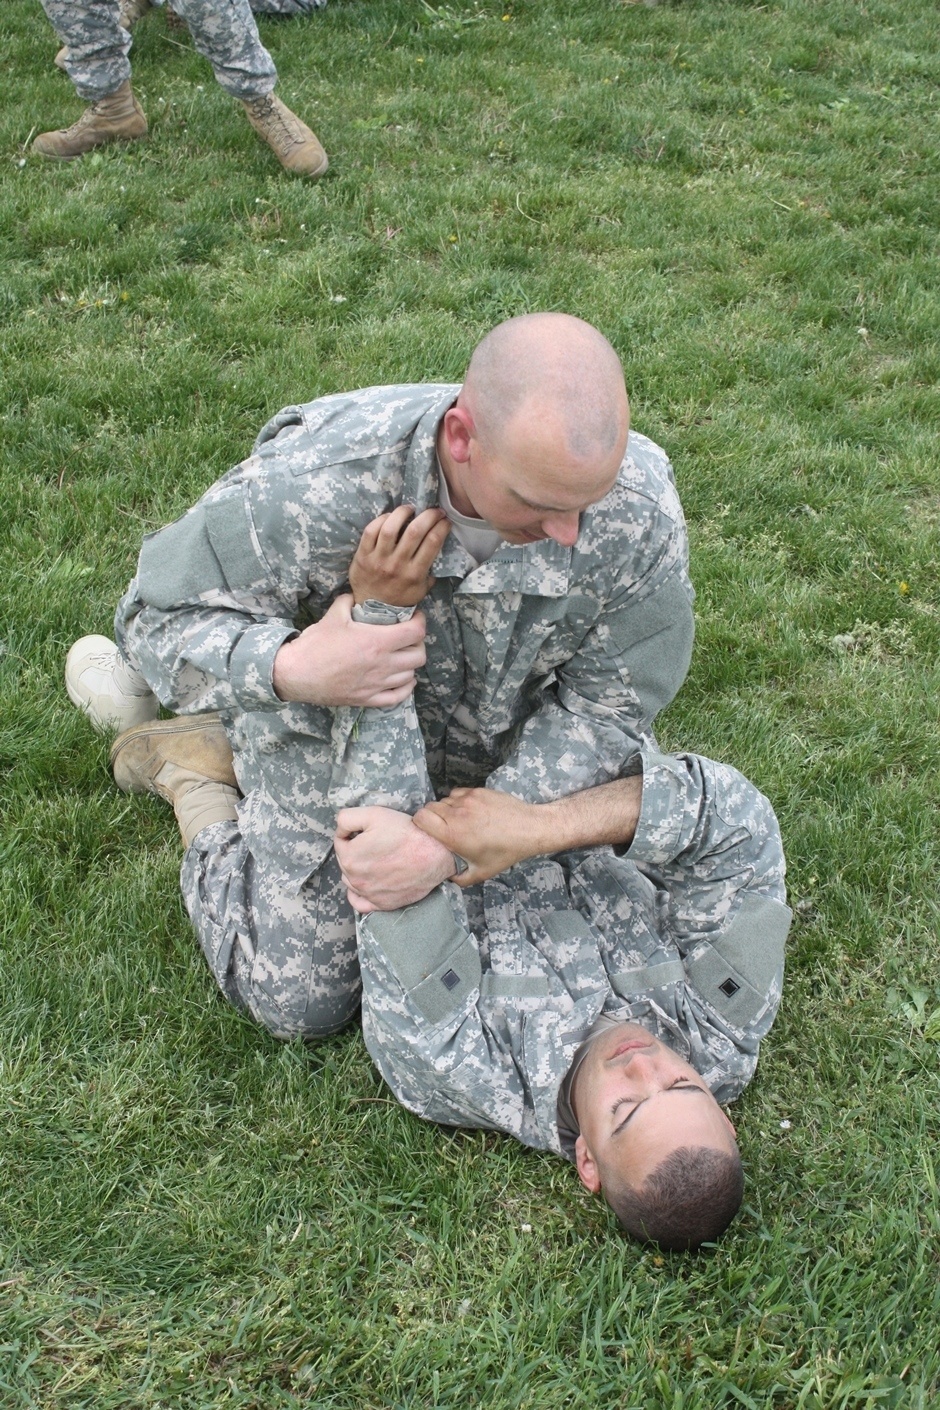 Engineer soldiers learn the basics of hand-to-hand combat